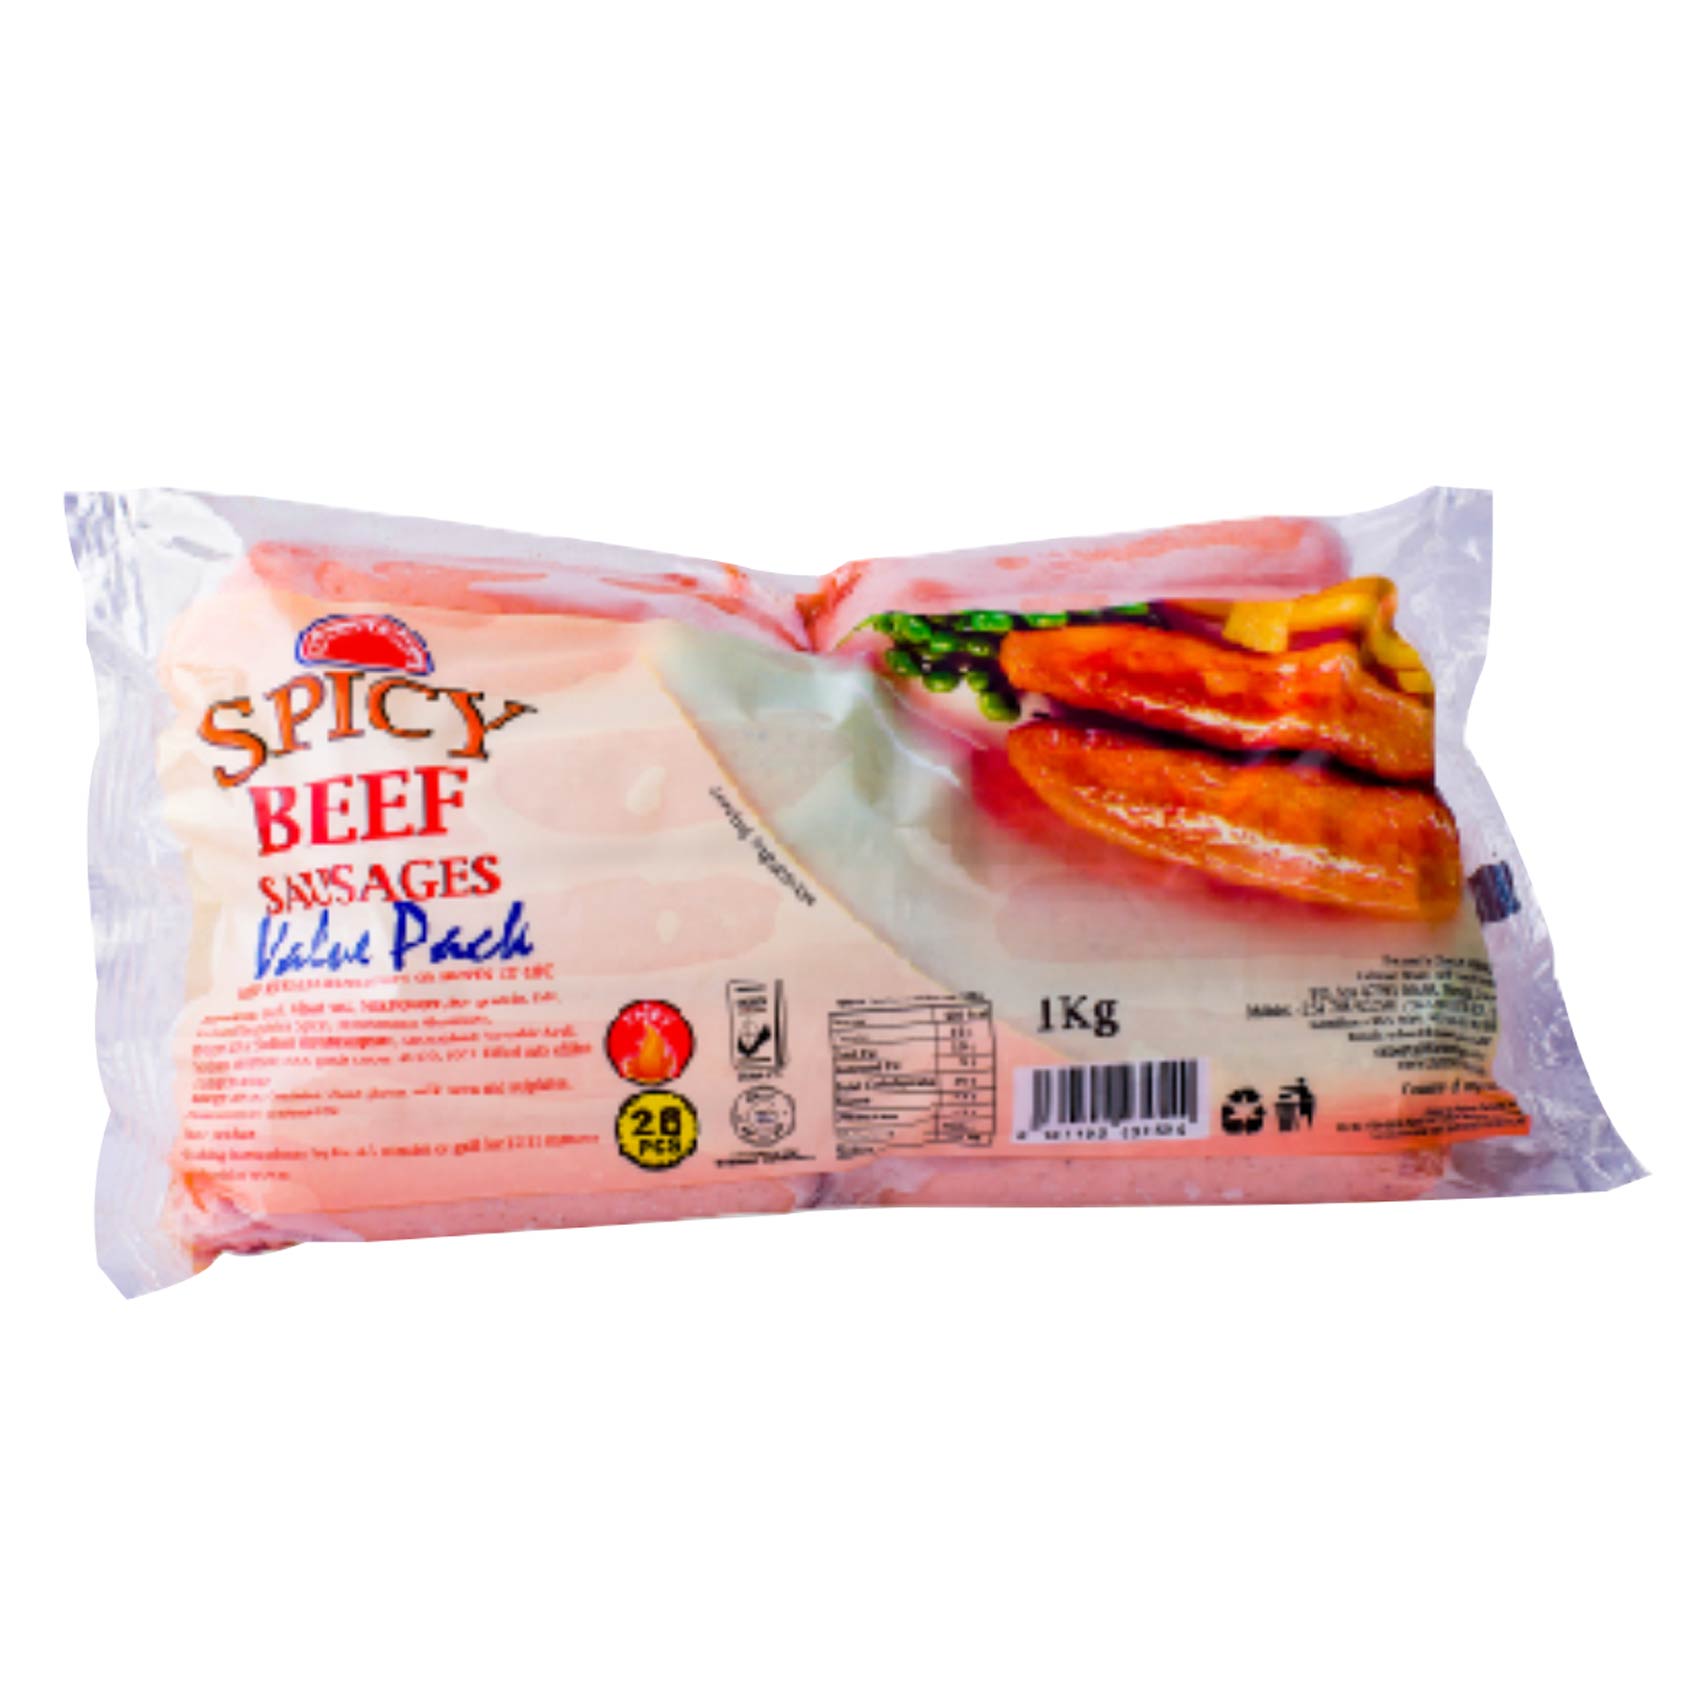 Farmers Choice Spicy Beef Sausage 1Kg